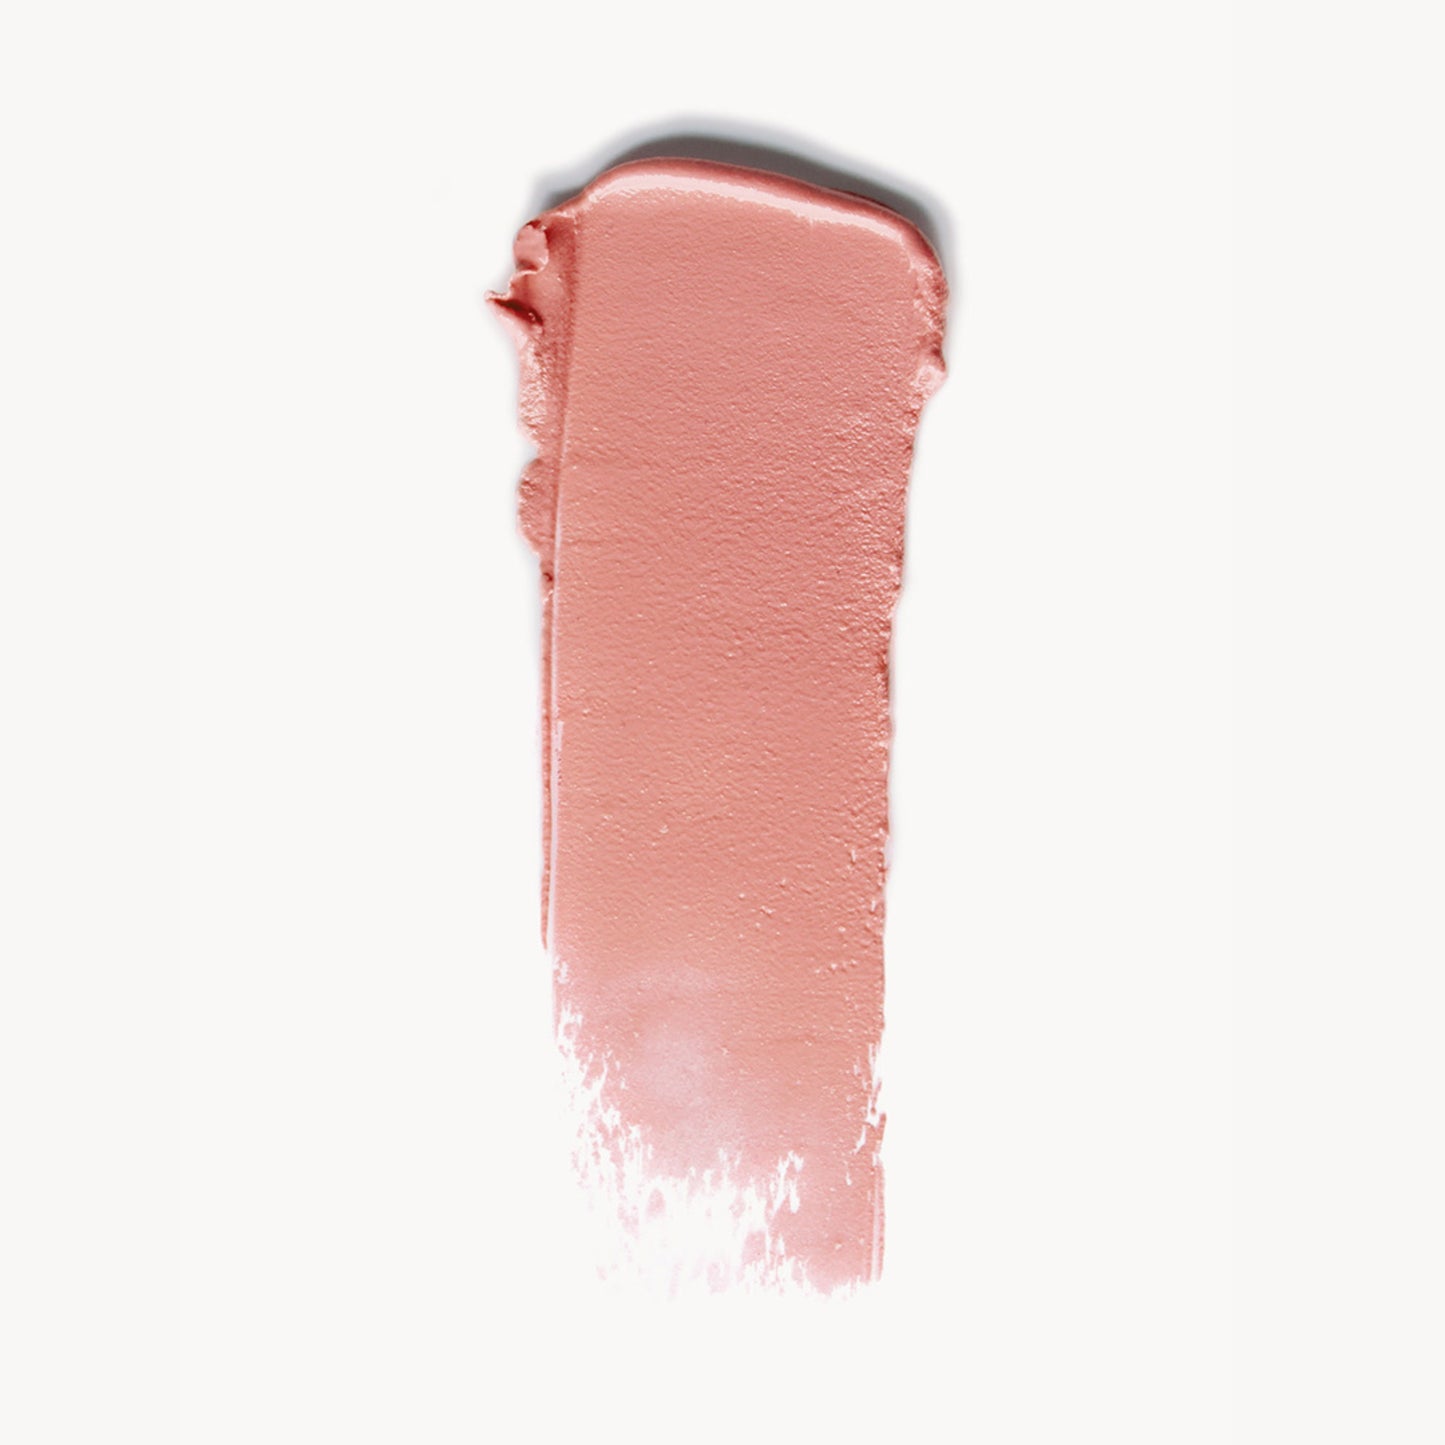 A wipe of nude pink cream blush on a white background